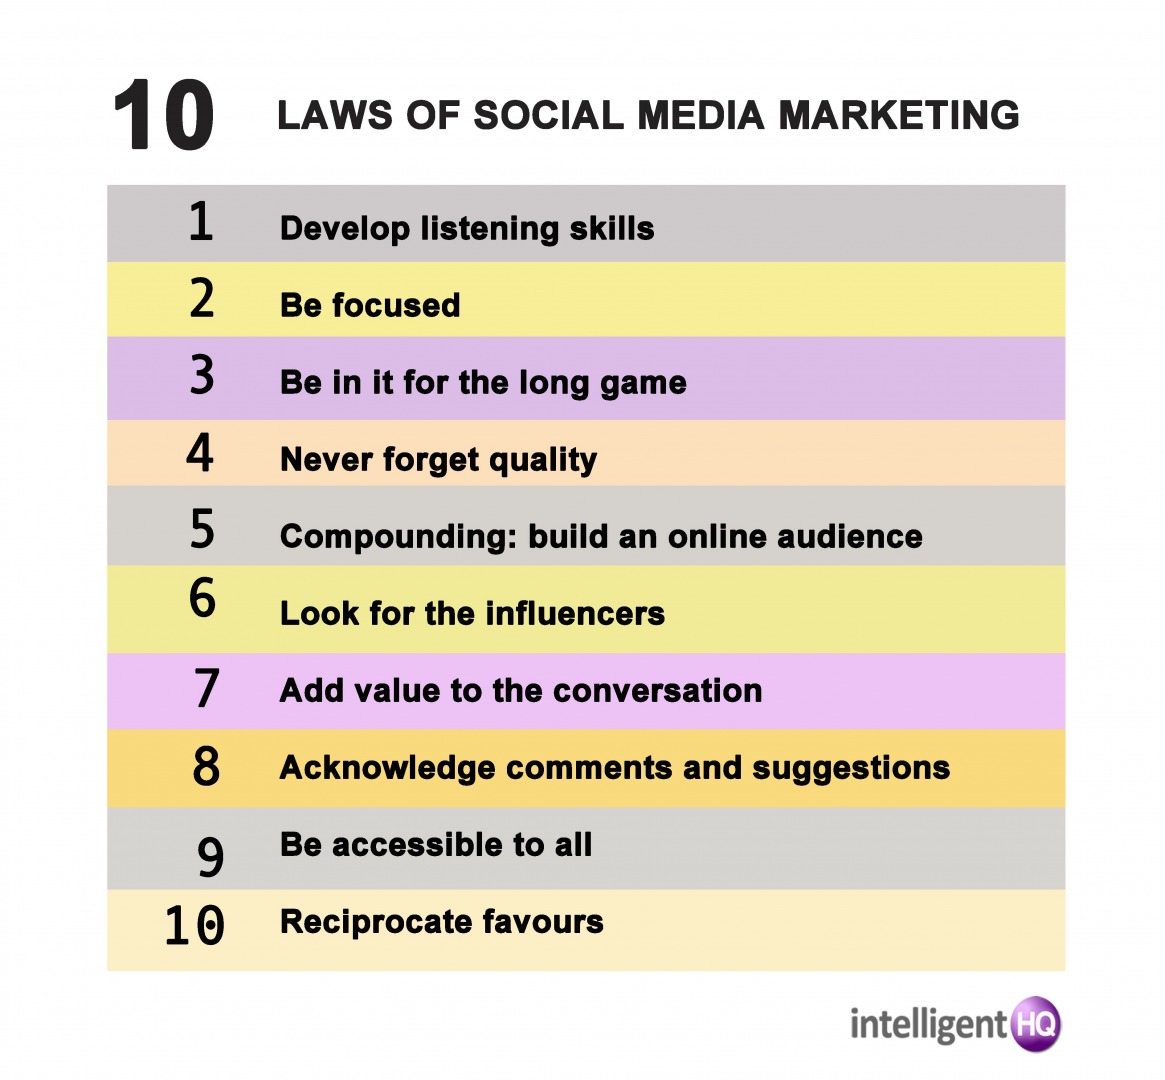 10 Laws of Social Media Marketing Infographic by Maria Fonseca